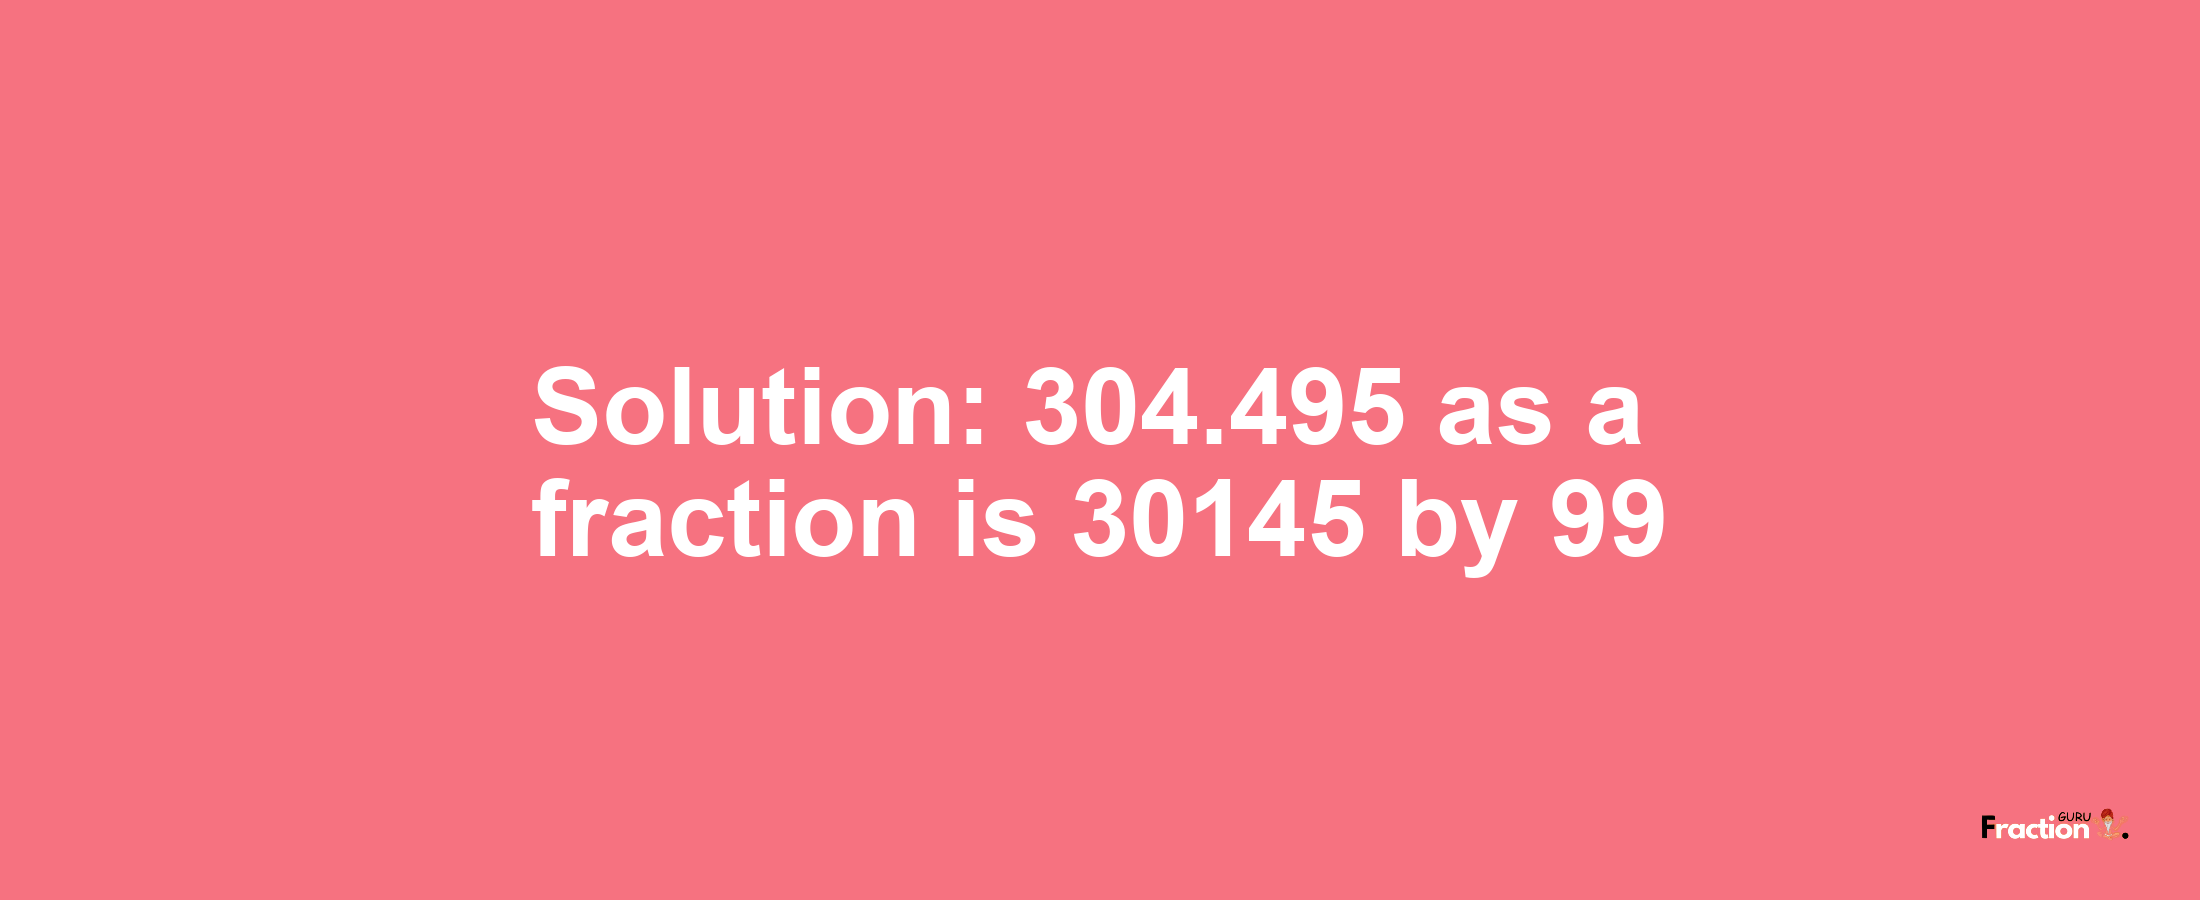 Solution:304.495 as a fraction is 30145/99